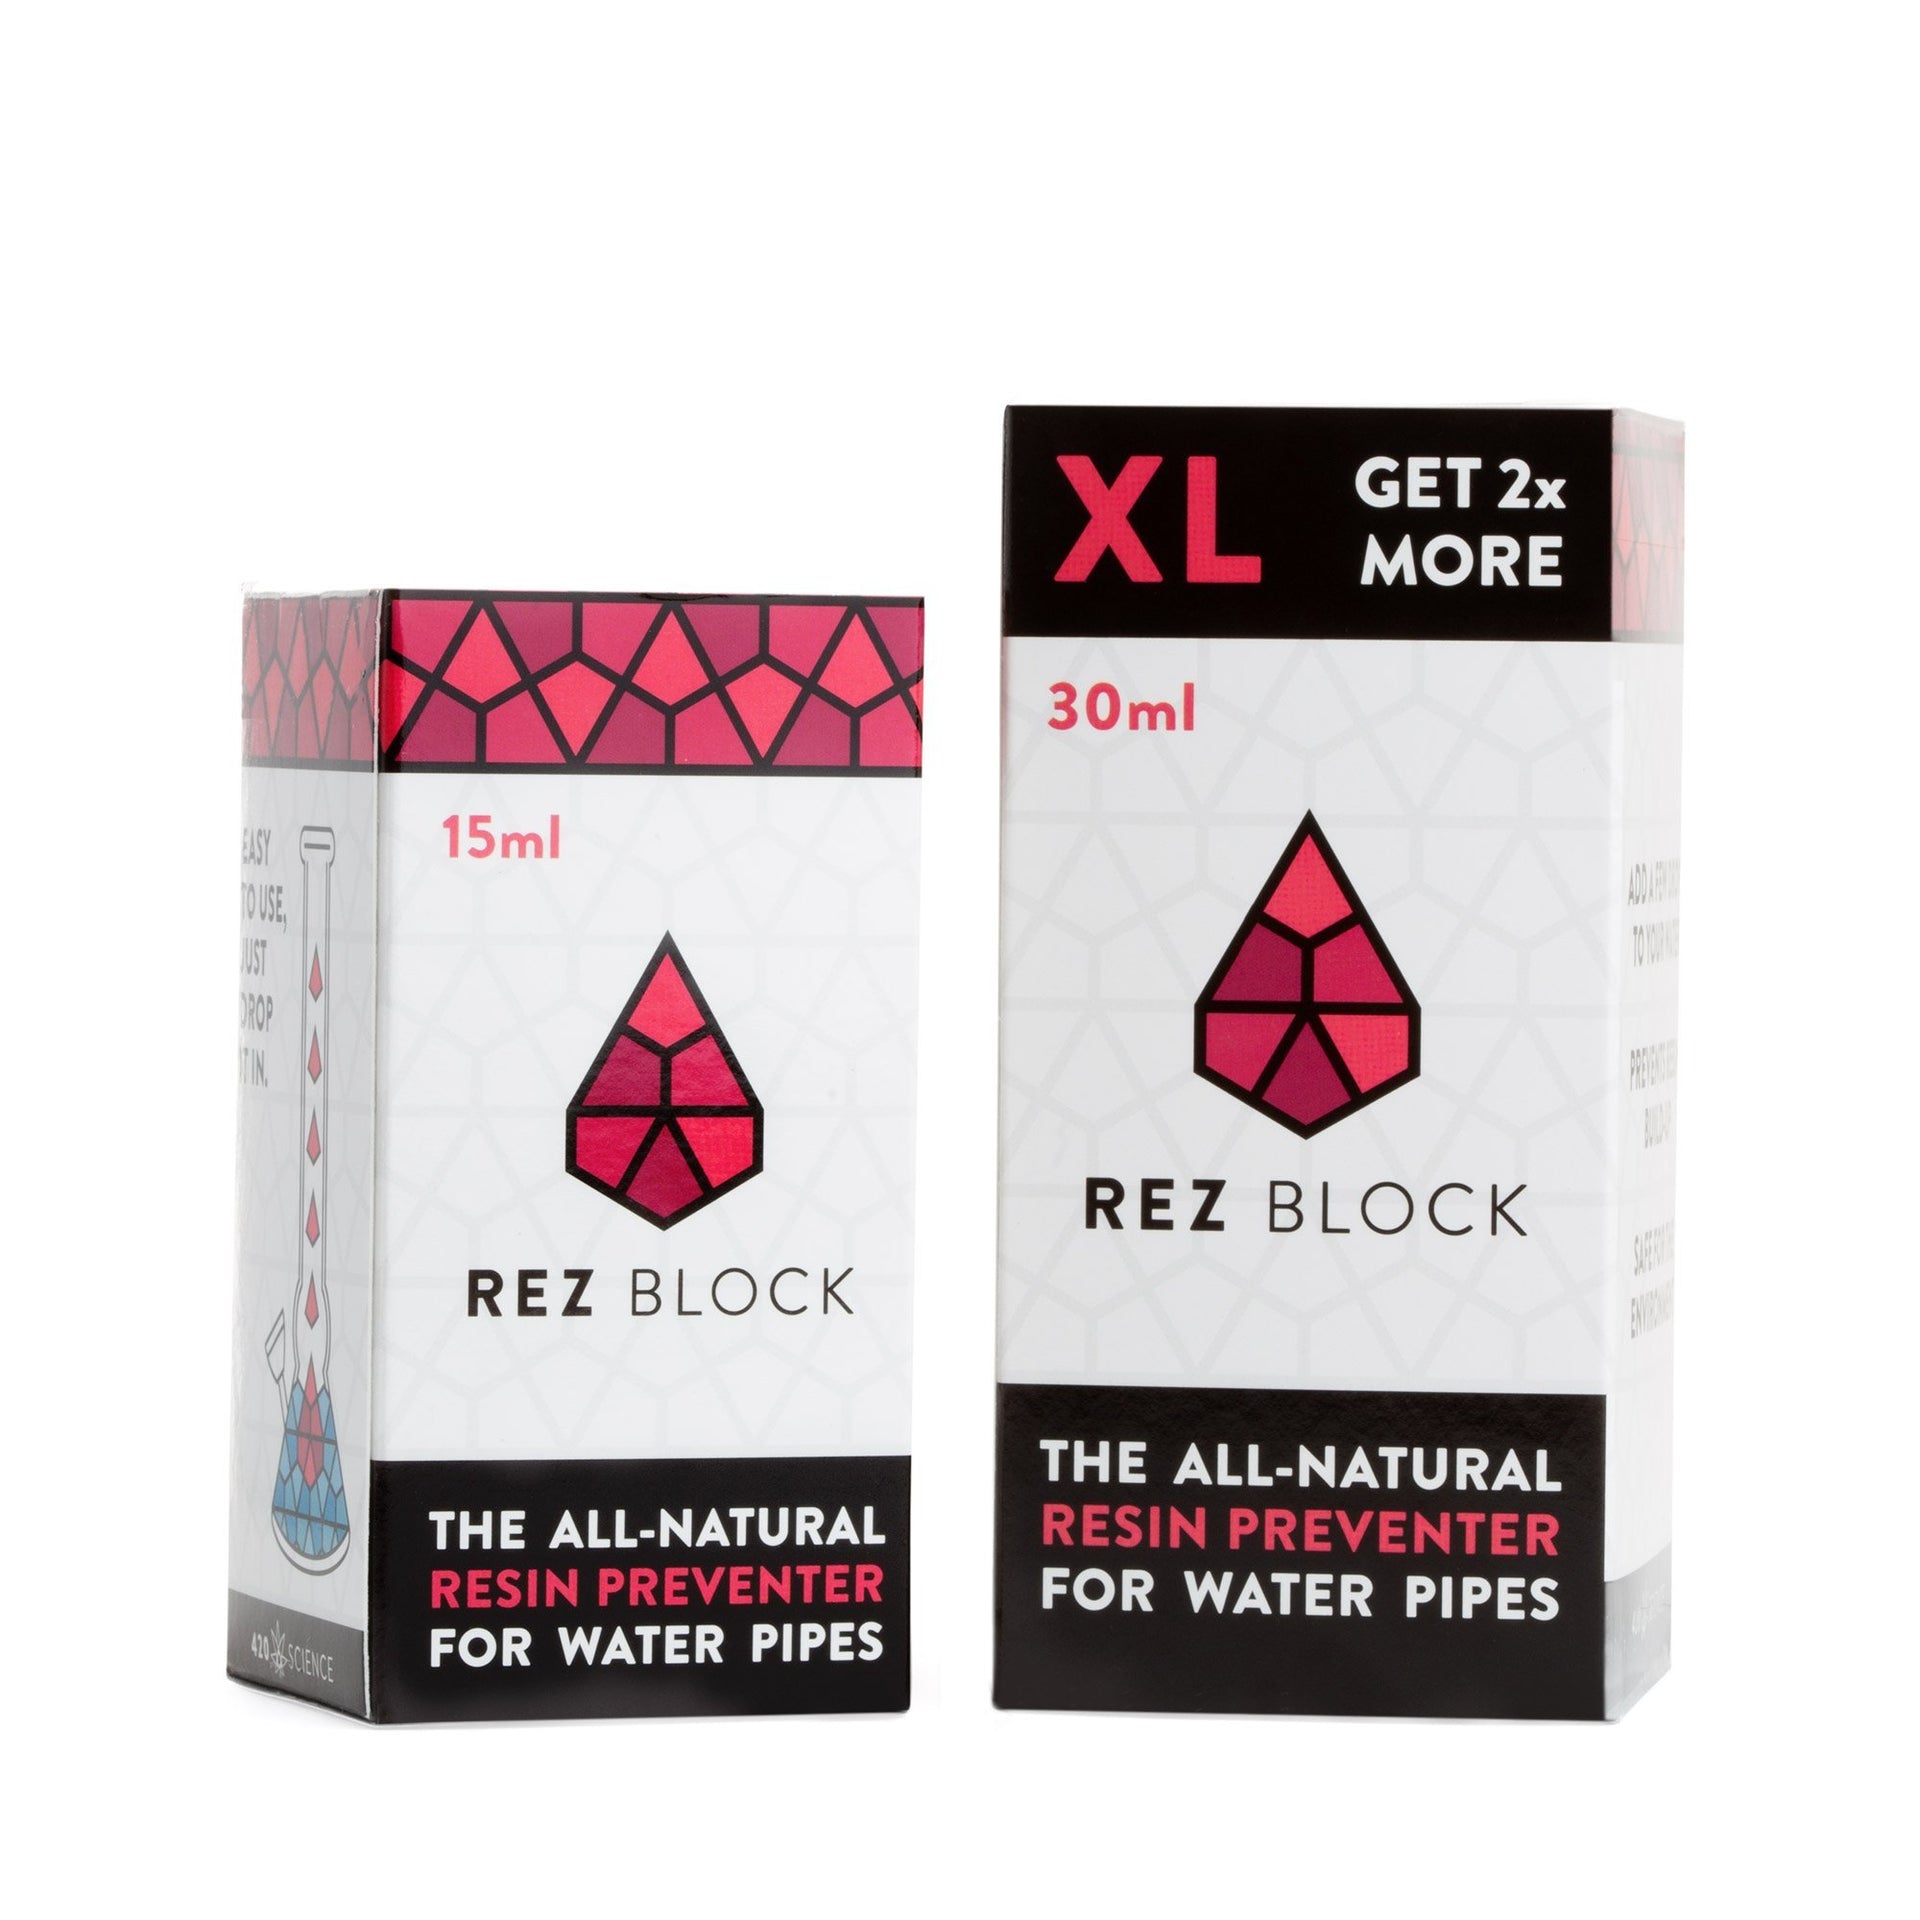 RezBlock XL - 420 Science - The most trusted online smoke shop.